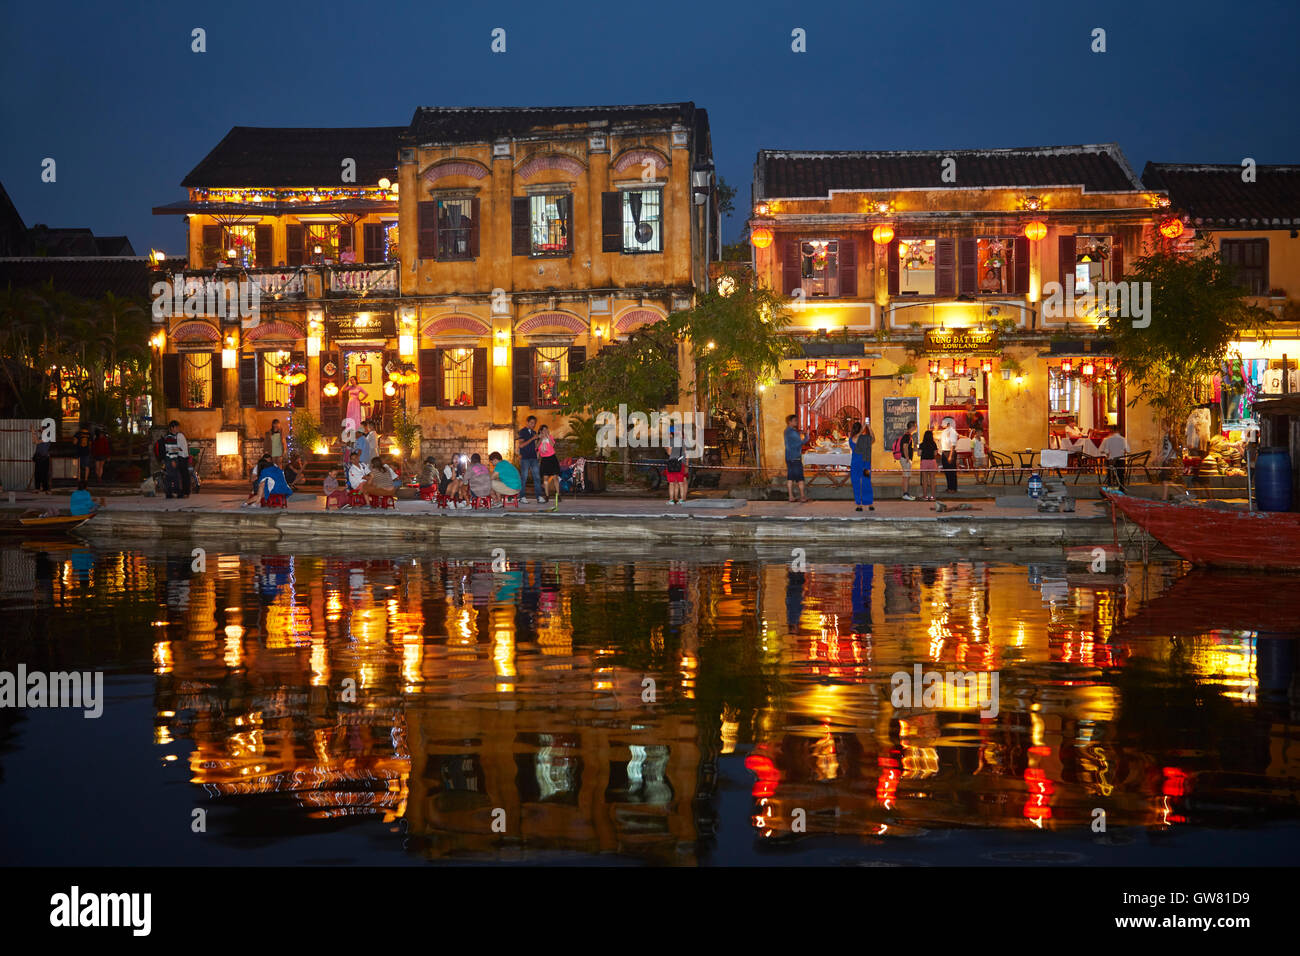 Restaurants and tourists reflected in Thu Bon River at dusk, Hoi An (UNESCO World Heritage Site), Vietnam Stock Photo